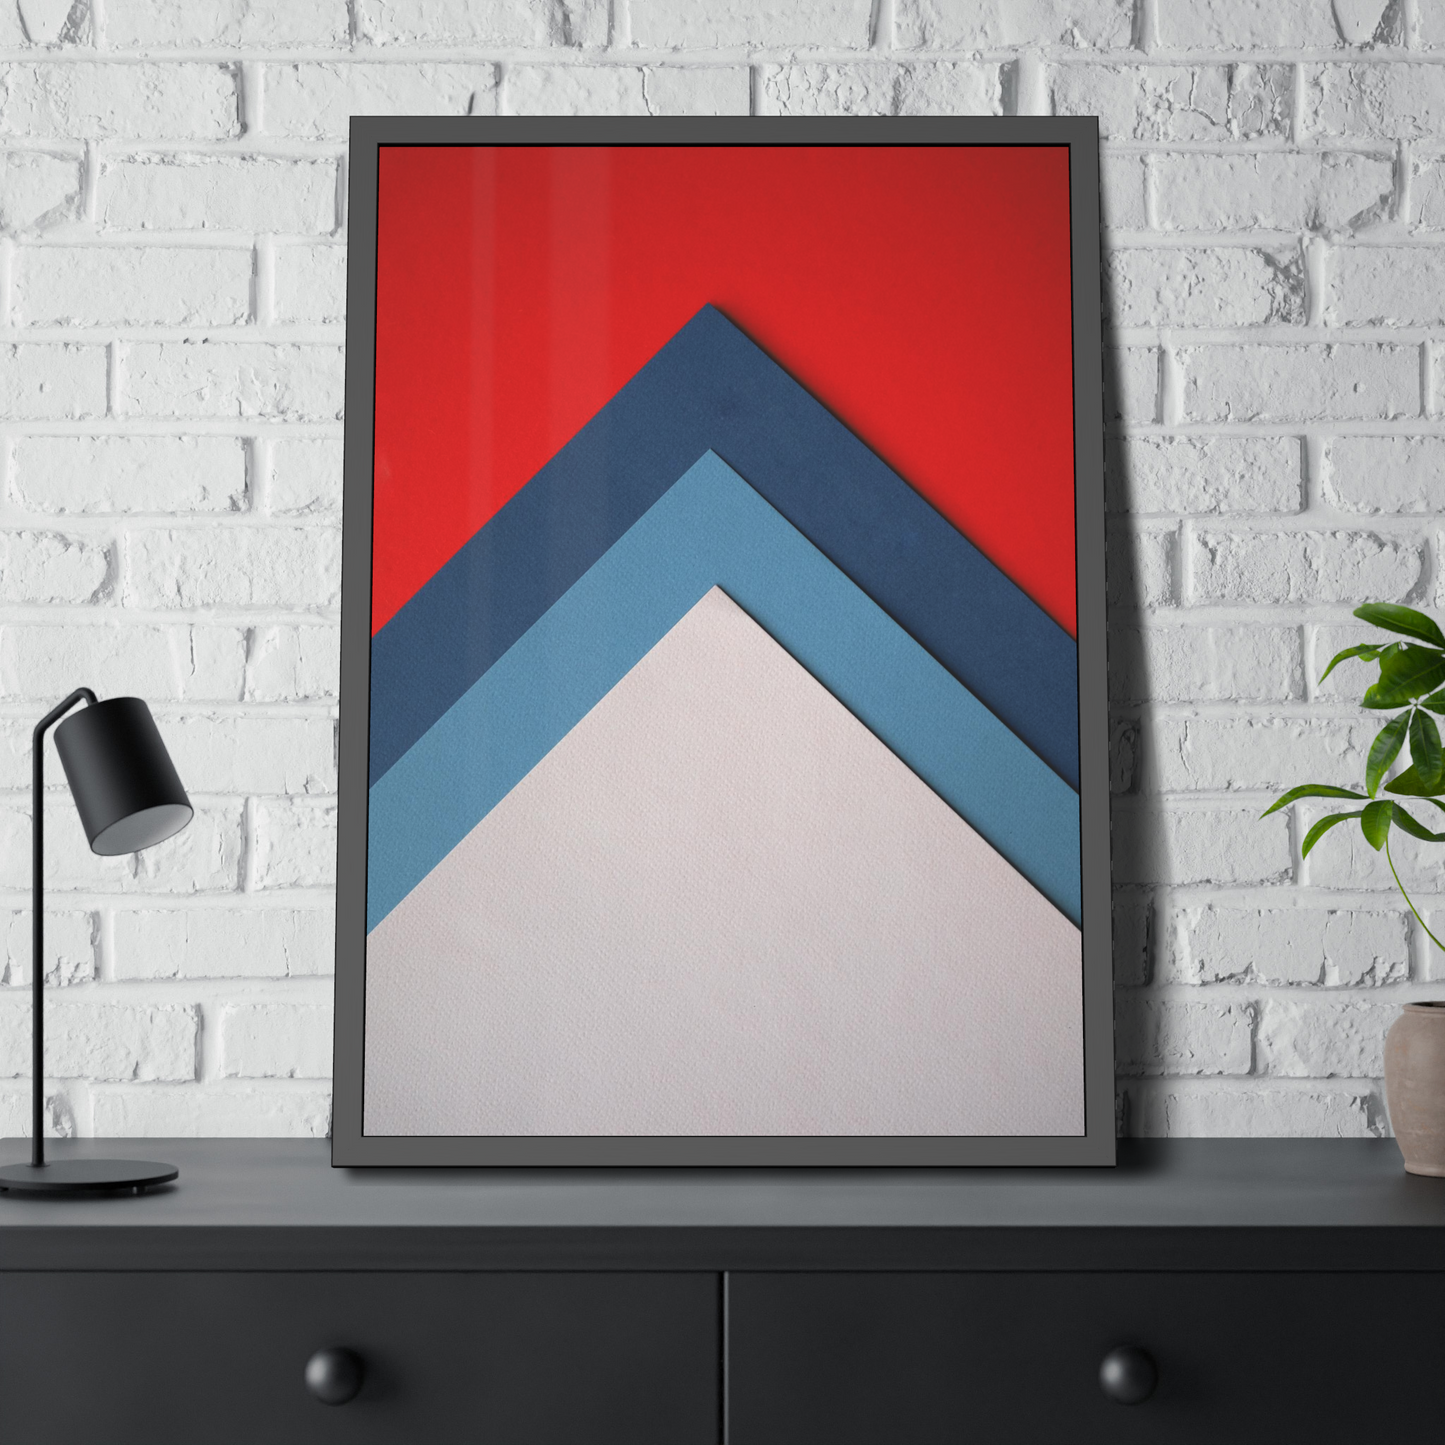 Artistic Minimalist Canvas: Abstract Design for Modern Wall Art